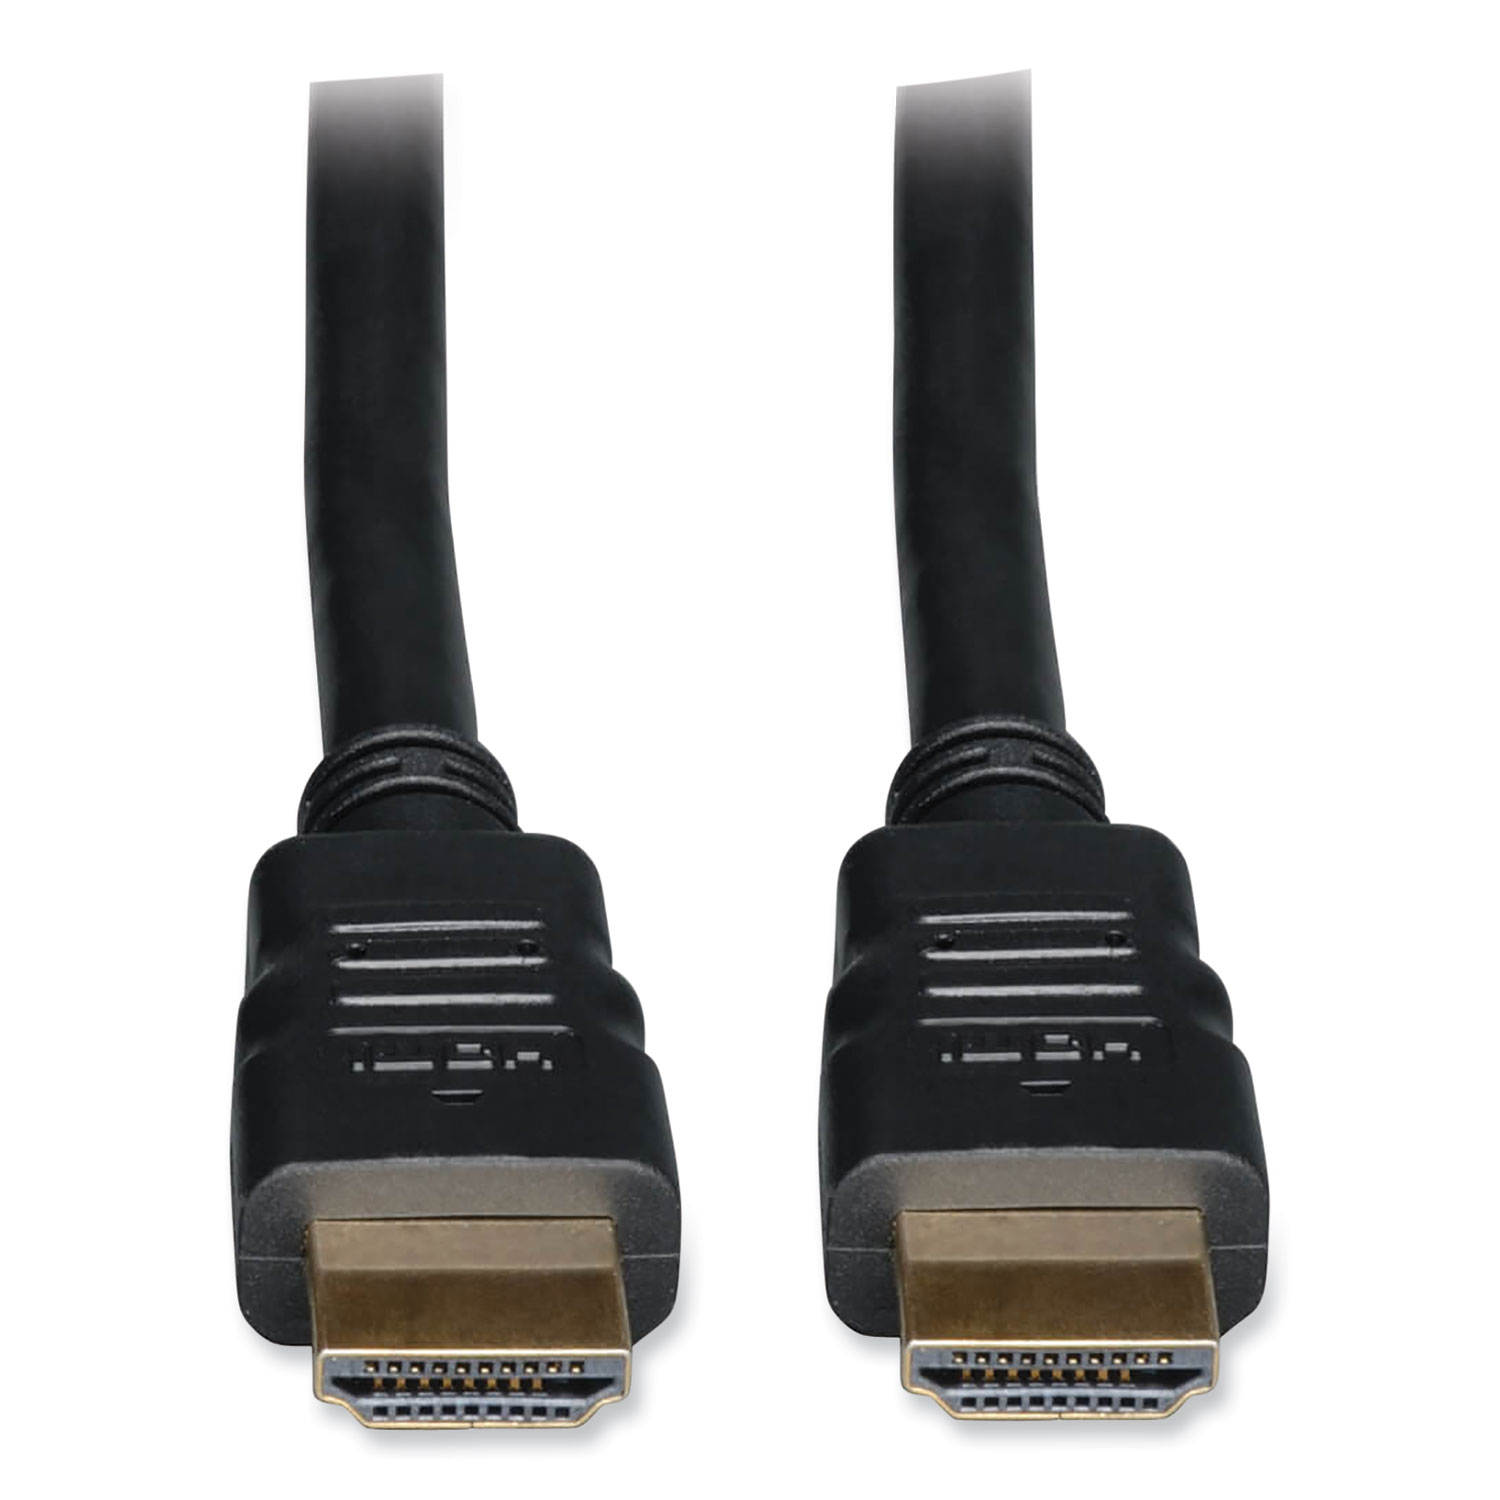 20 ft High Speed HDMI Cable – Ultra HD 4k x 2k HDMI Cable – HDMI to HDMI M/M